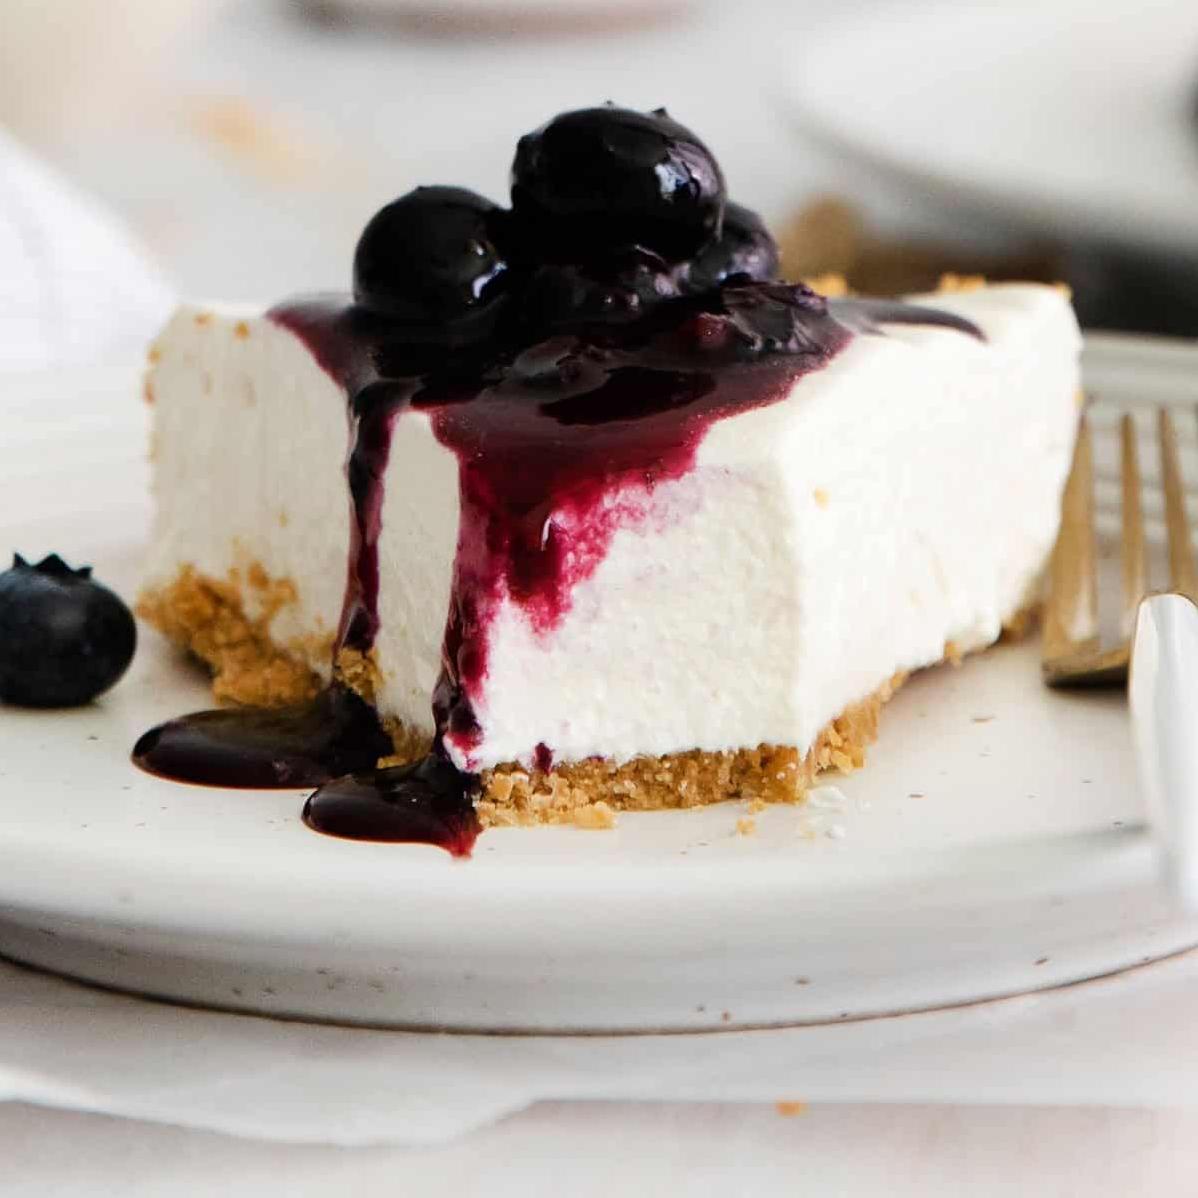  Who knew that cheesecake could be both gluten-free and delicious?